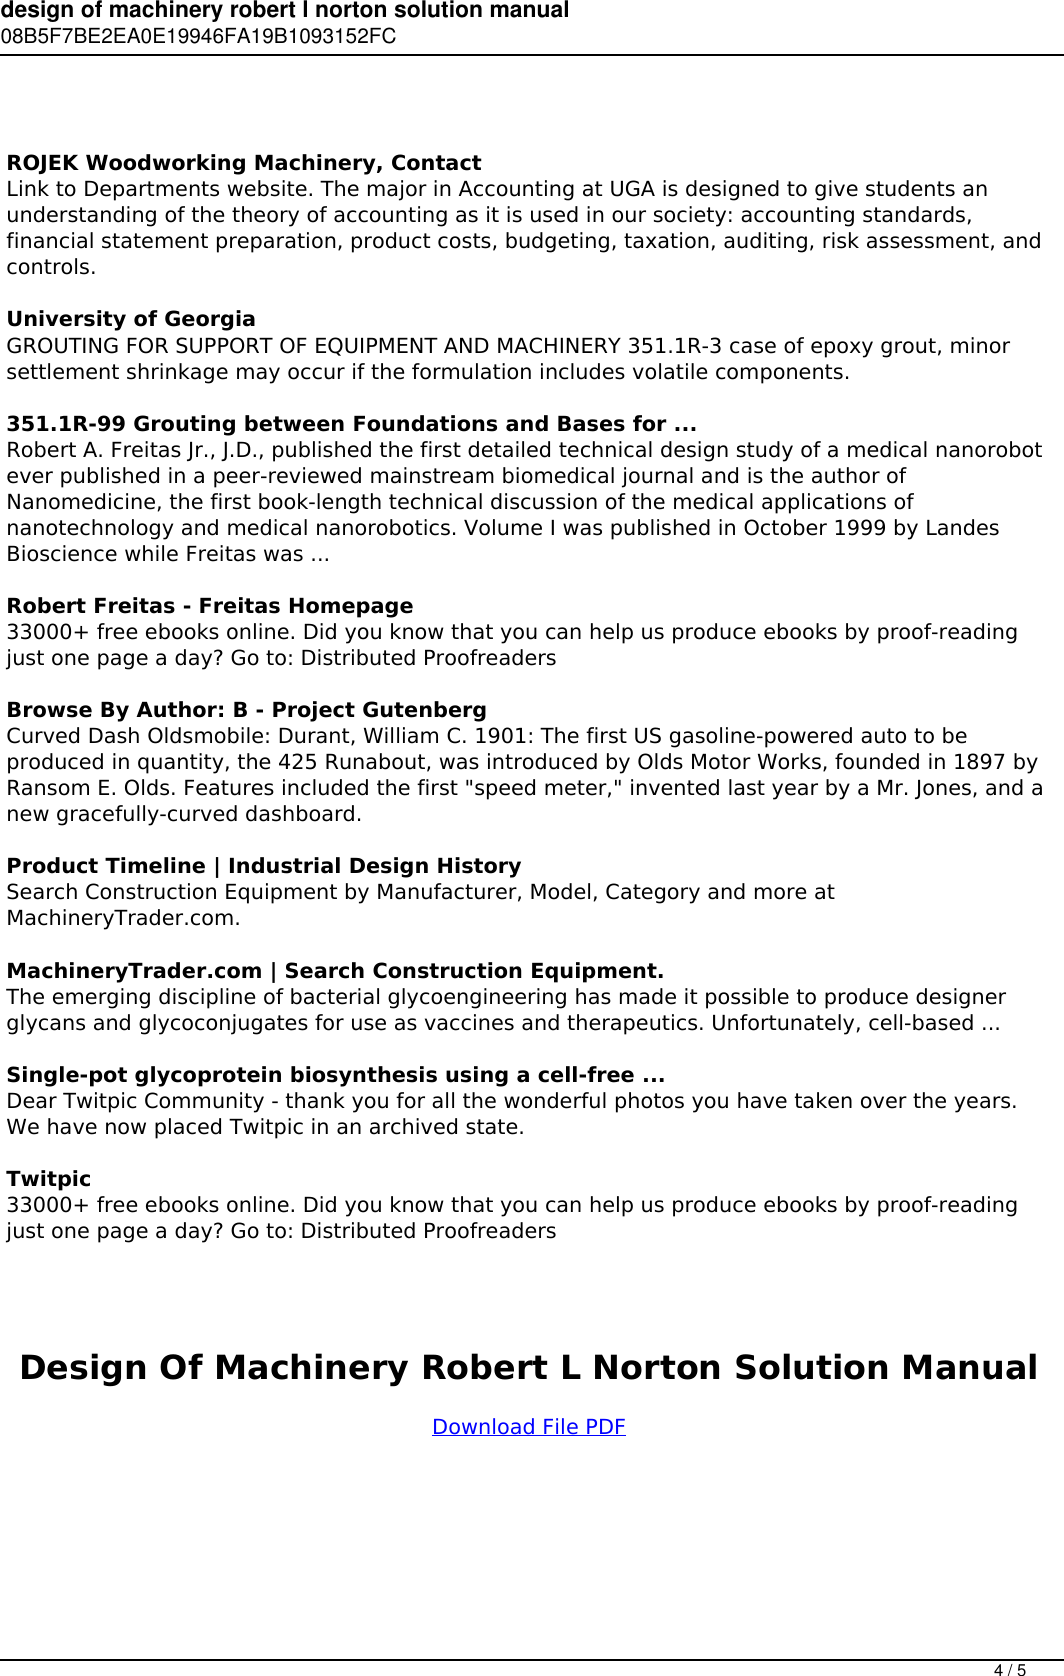 Page 4 of 5 - Design Of Machinery Robert L Norton Solution Manual